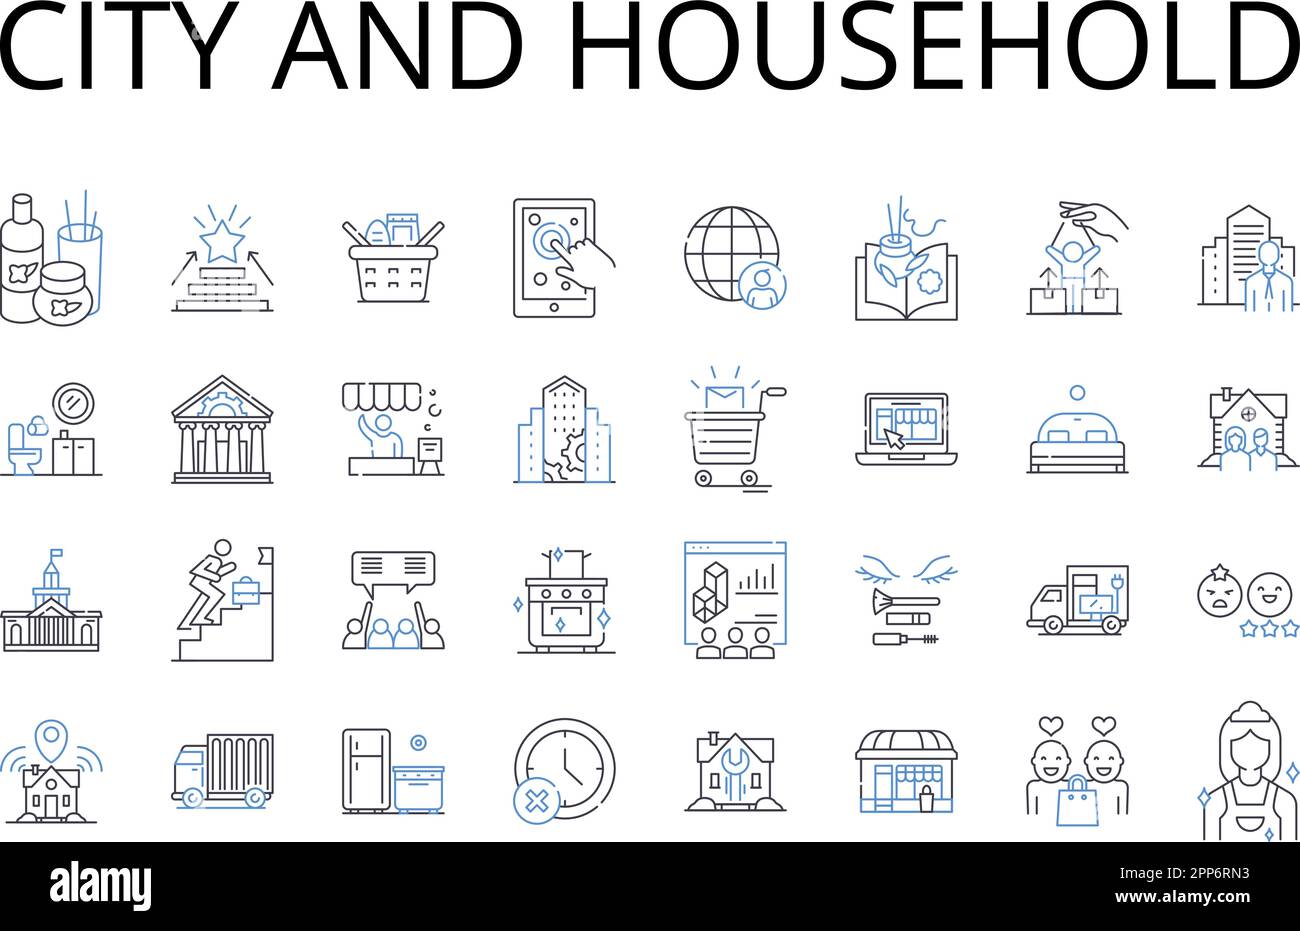 City and household line icons collection. ity, Metropolis, Urban center, Megalopolis, Municipality, Capital, Town vector and linear illustration Stock Vector